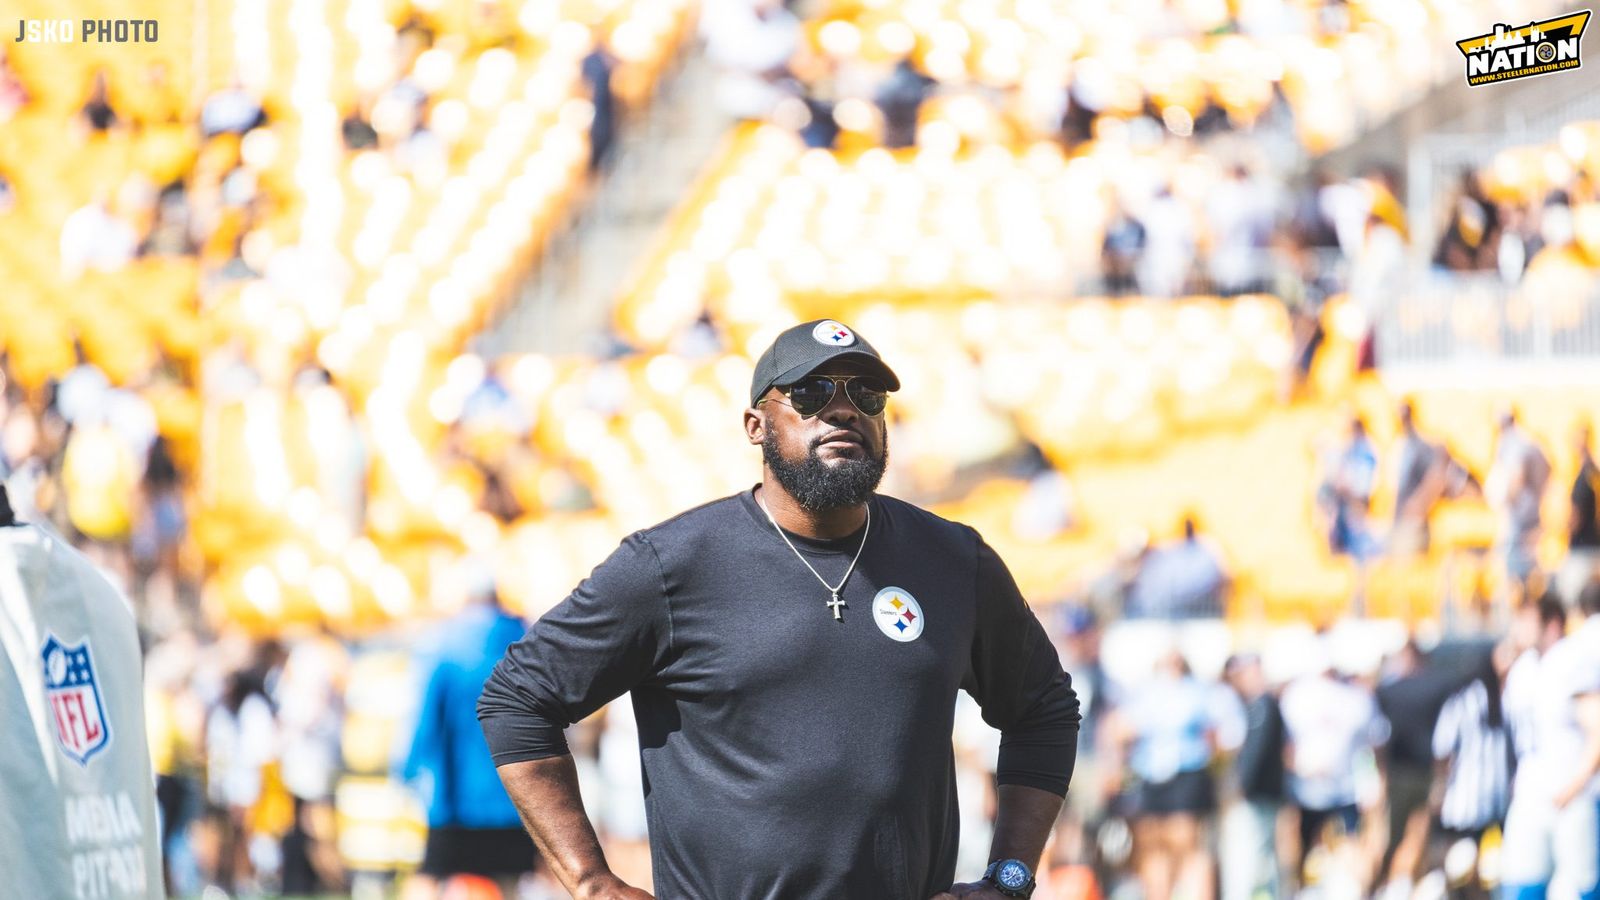 Despite Weather Steelers' Head Coach Mike Tomlin Clearly Not